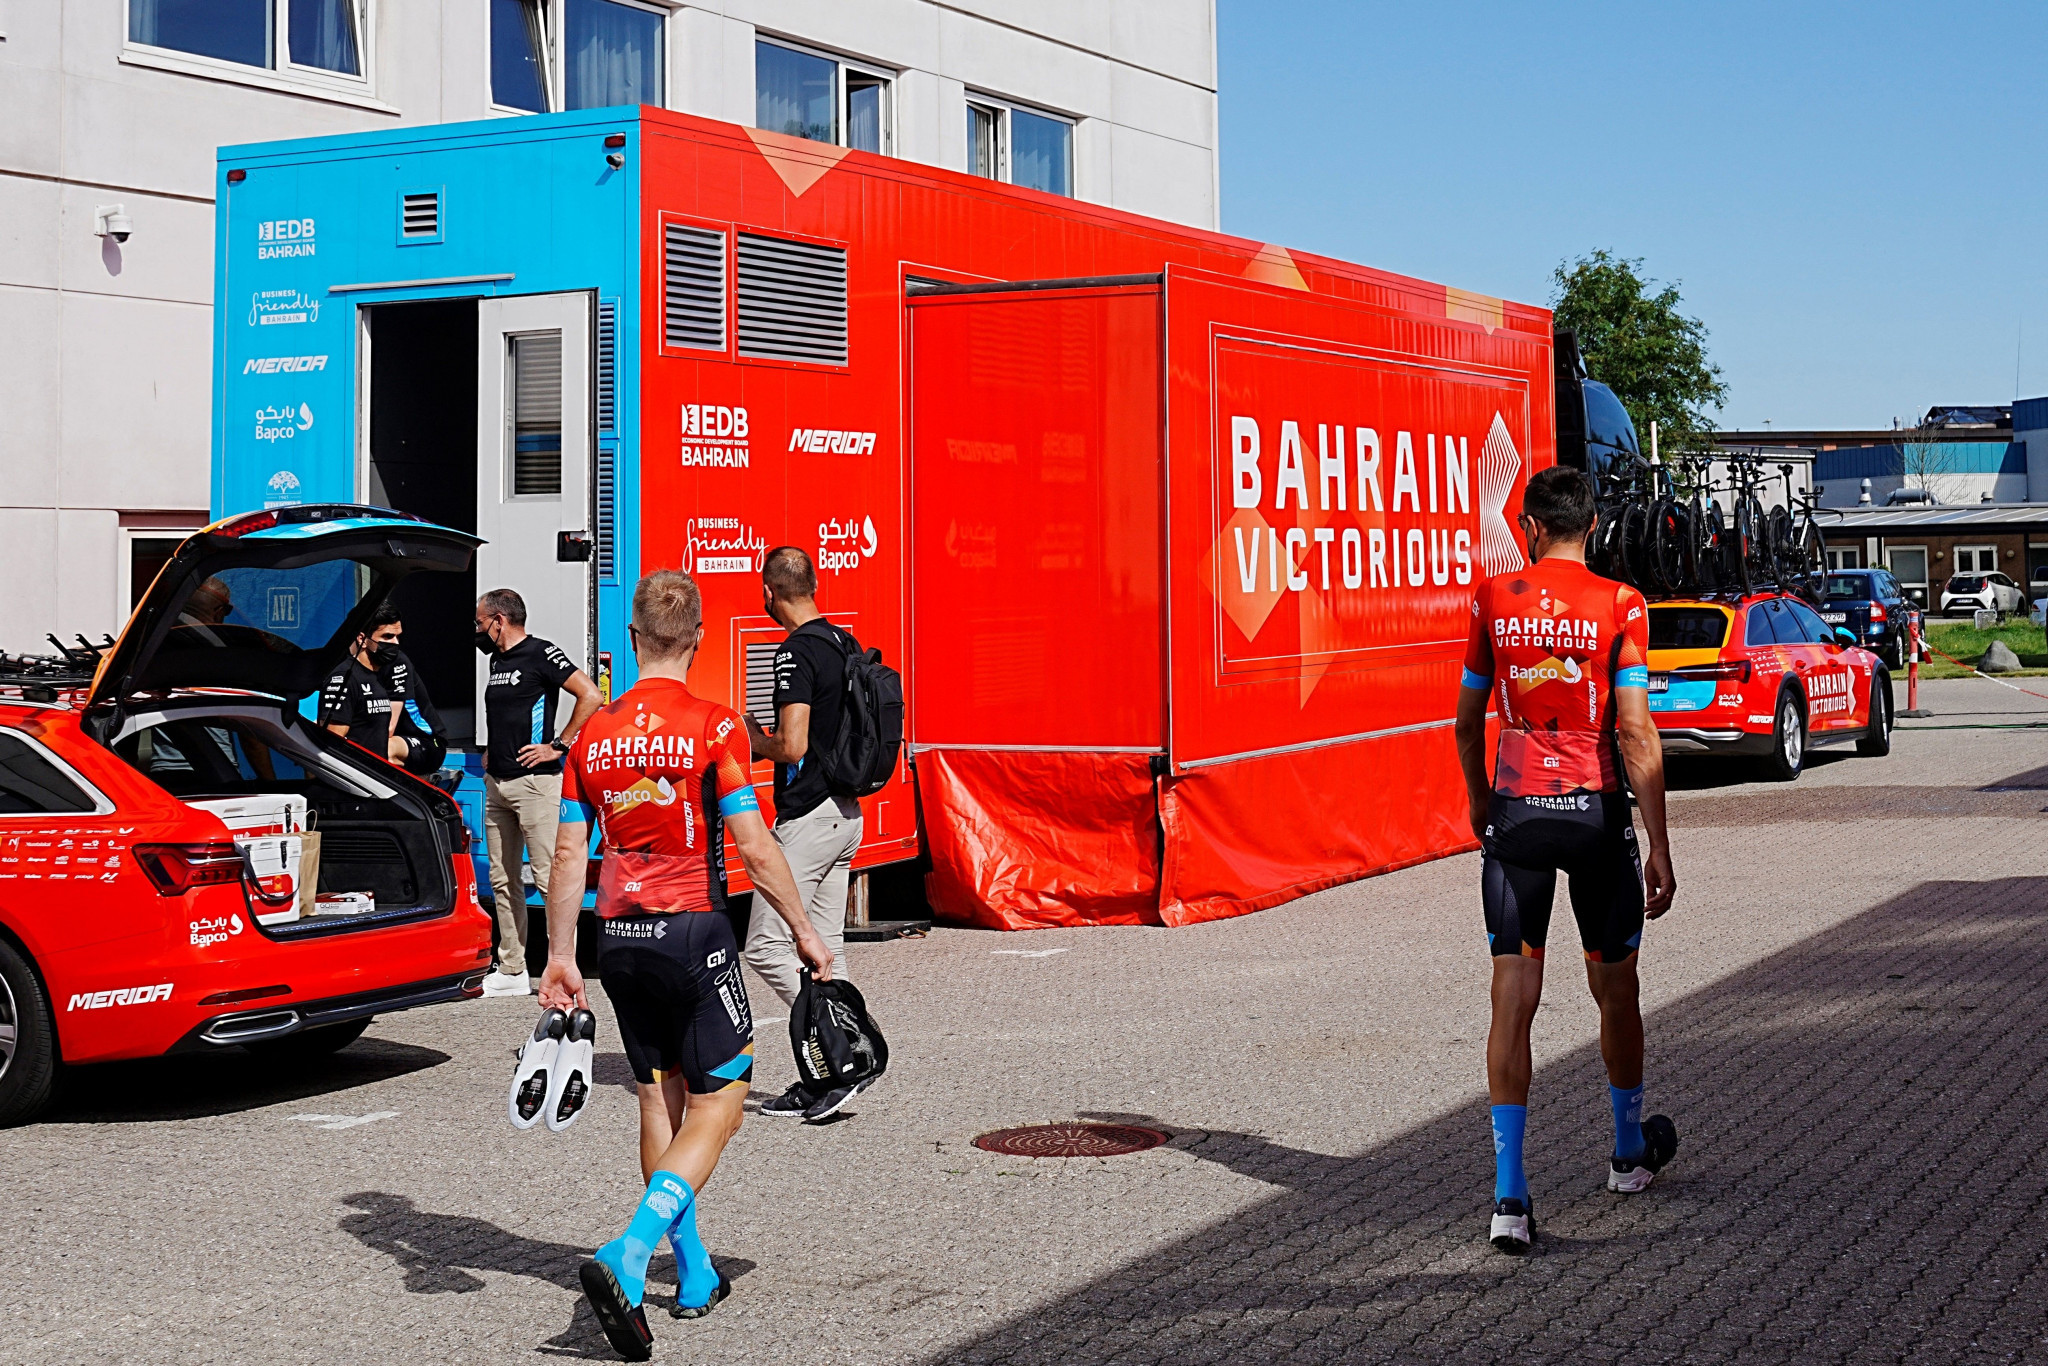 Bahrain Victorious hit by another police raid on eve of Tour de France